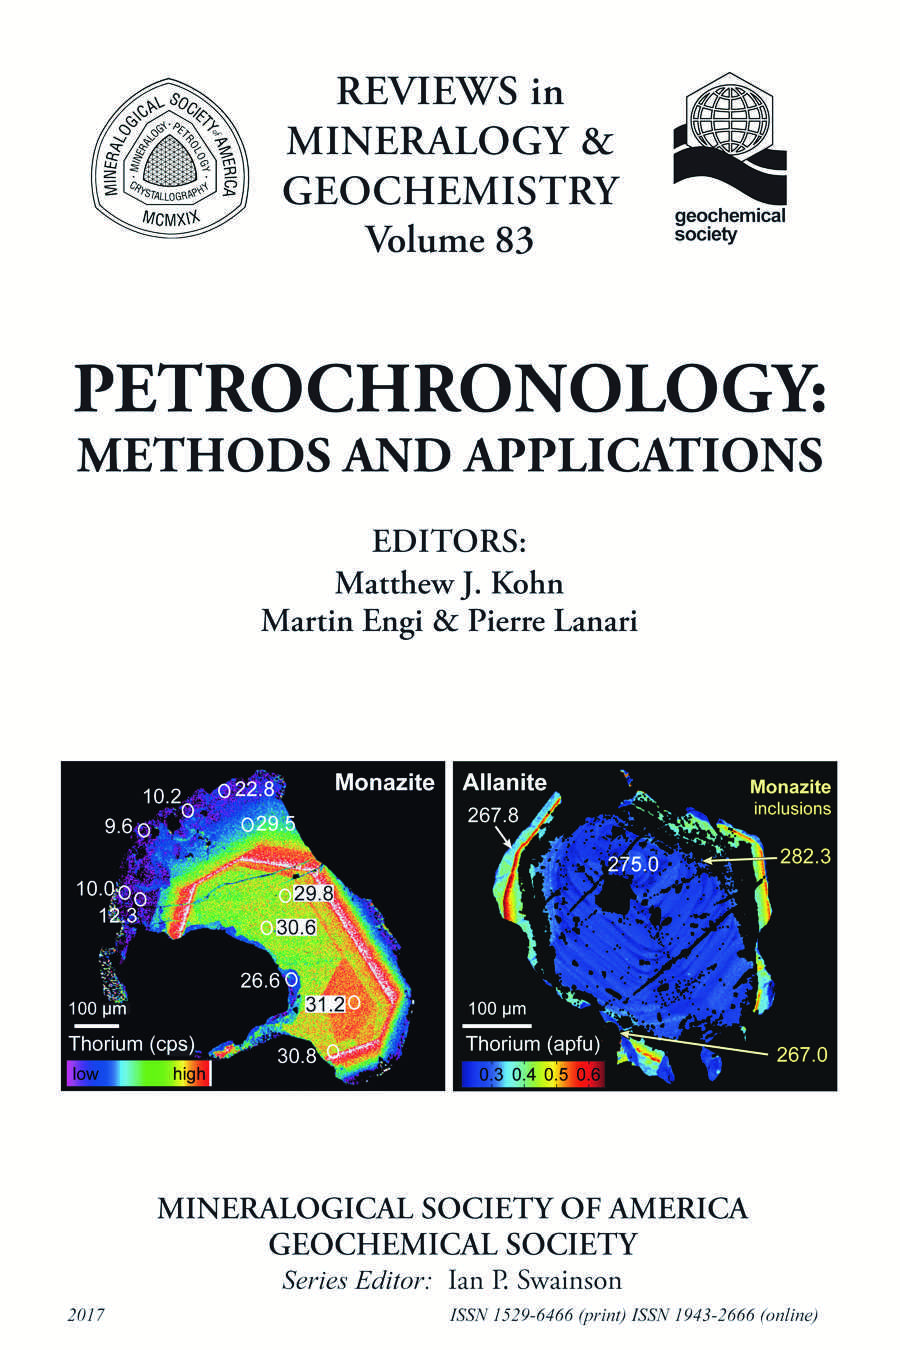 Front Cover of Reviews in Mineralogy and Geochmistry vol 83